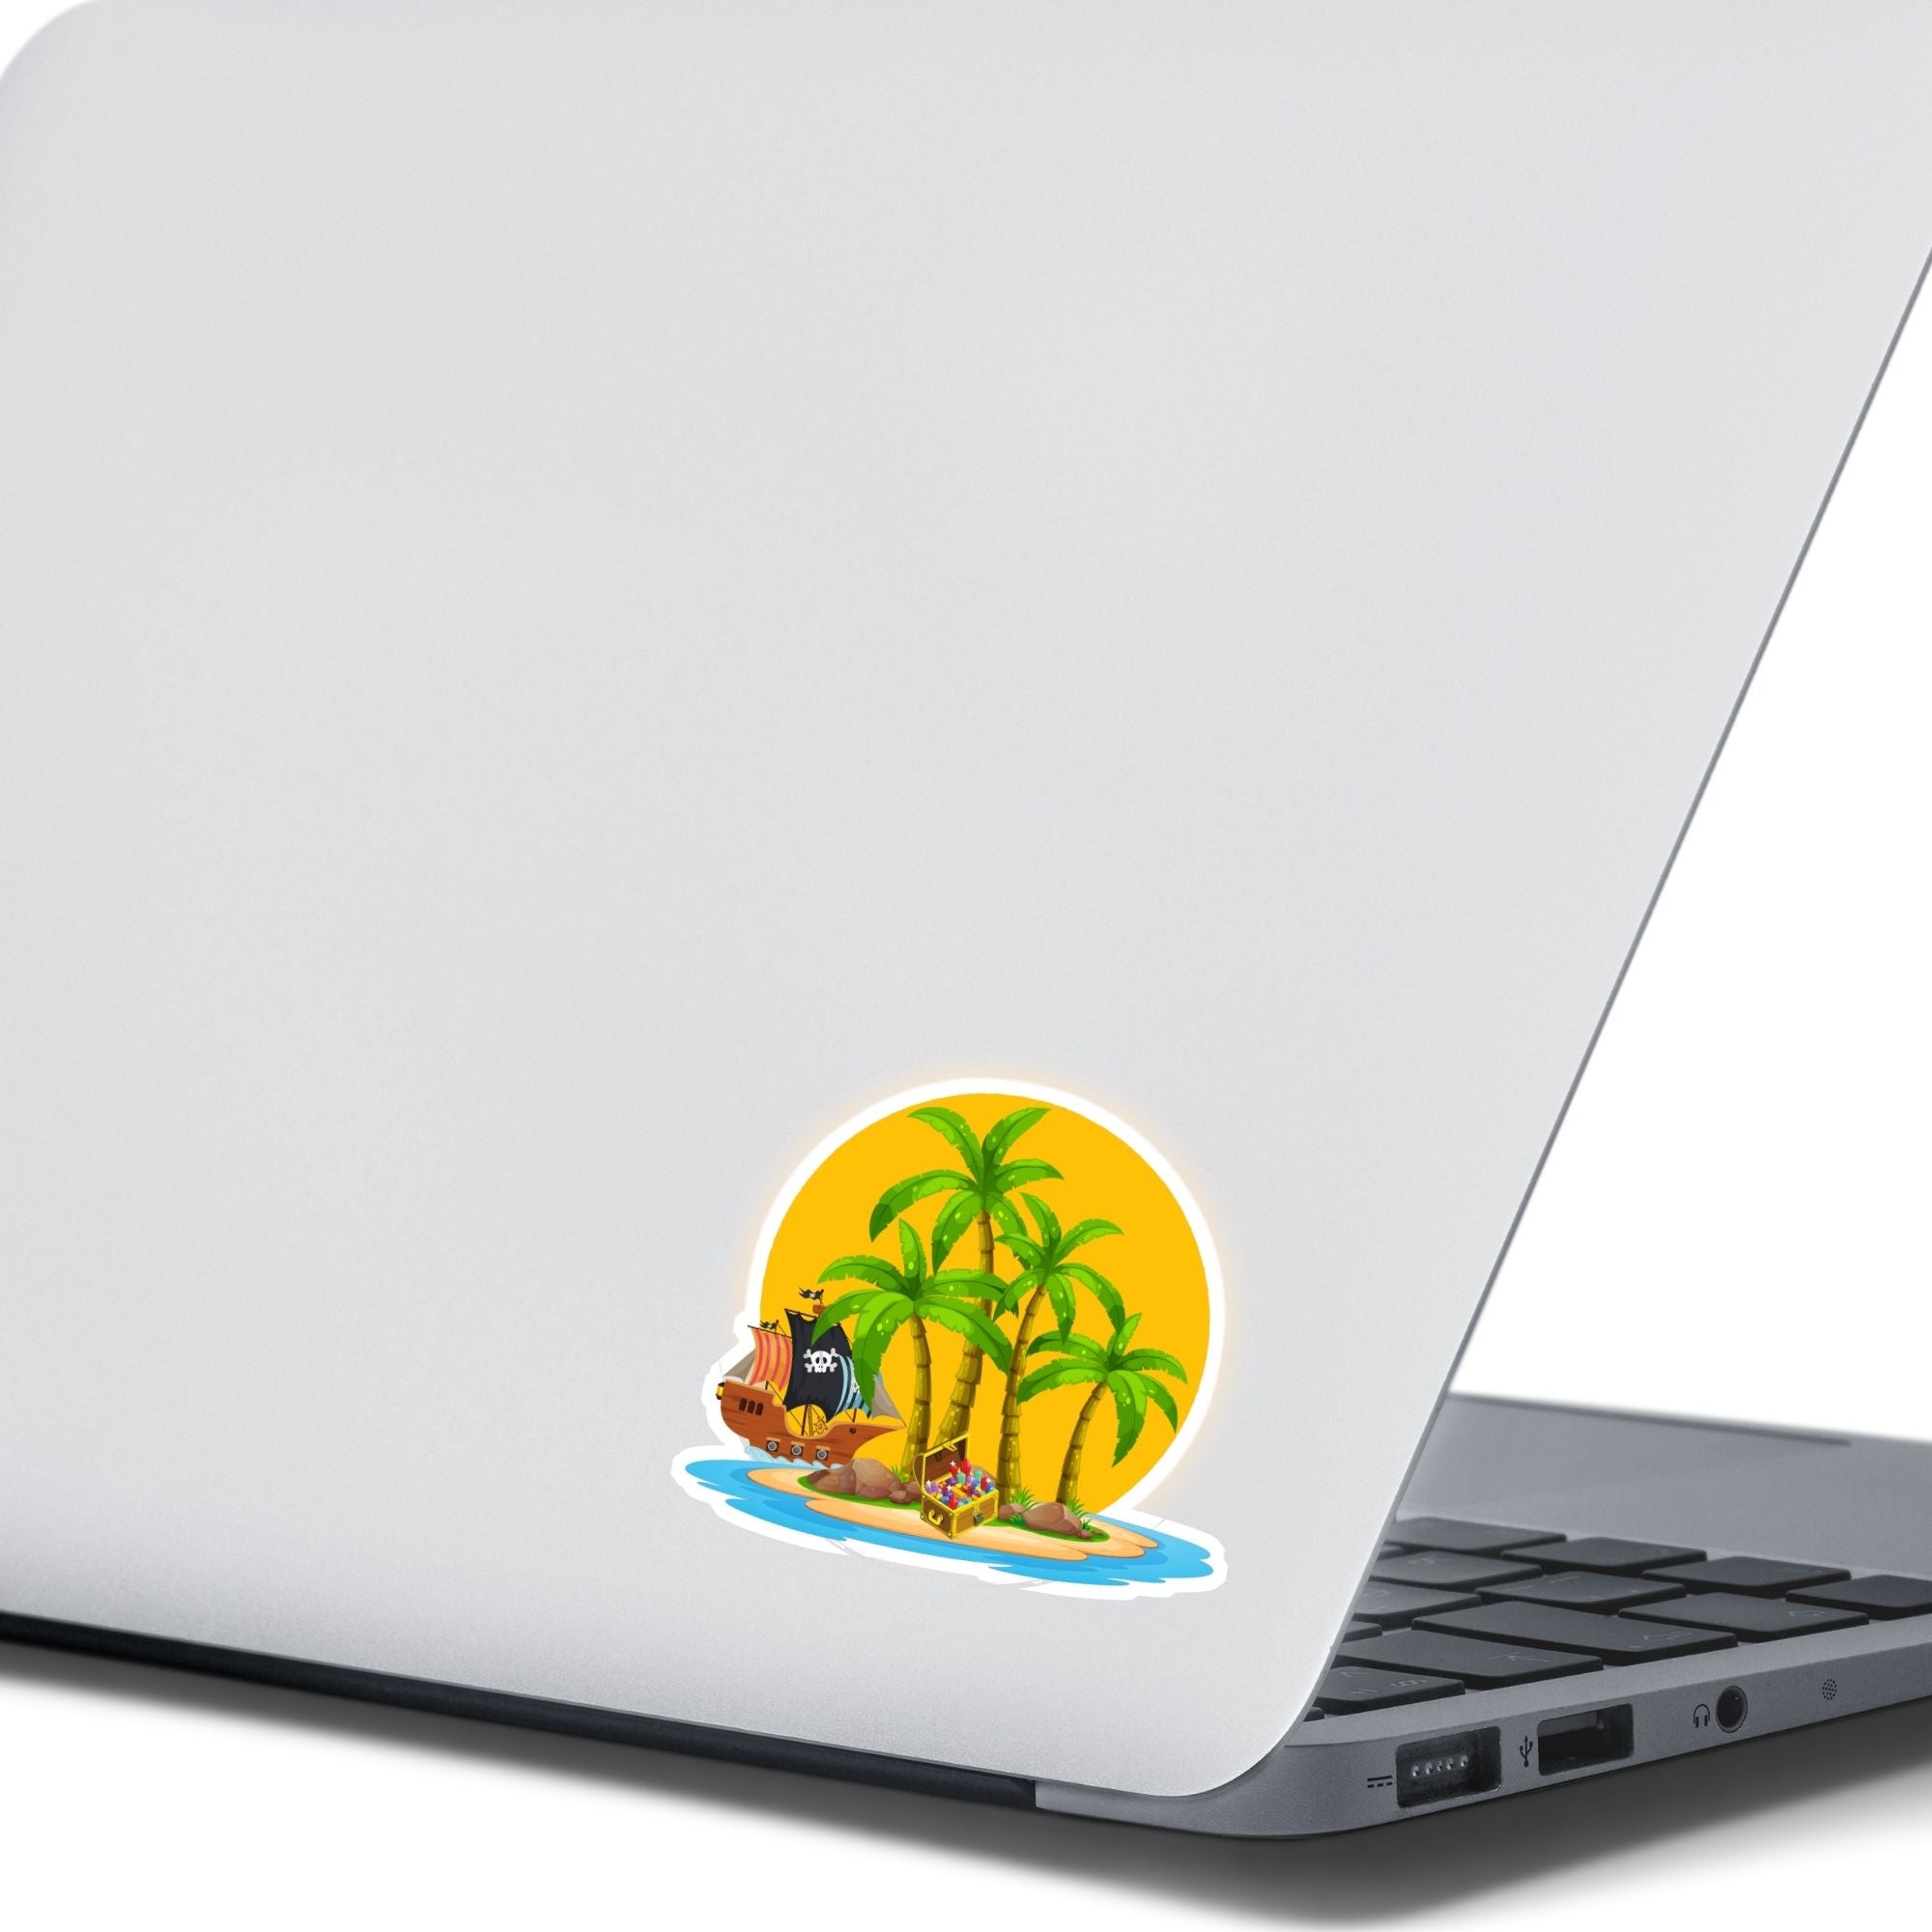 Pirate's Treasure awaits on this topical island! This individual die-cut sticker features an island with palm trees in front of the setting sun, and yes that is a treasure chest on the beach. But you'd better hurry before the pirate ship gets there and makes off with the prize! This image shows the Treasure Island sticker on the back of an open laptop.